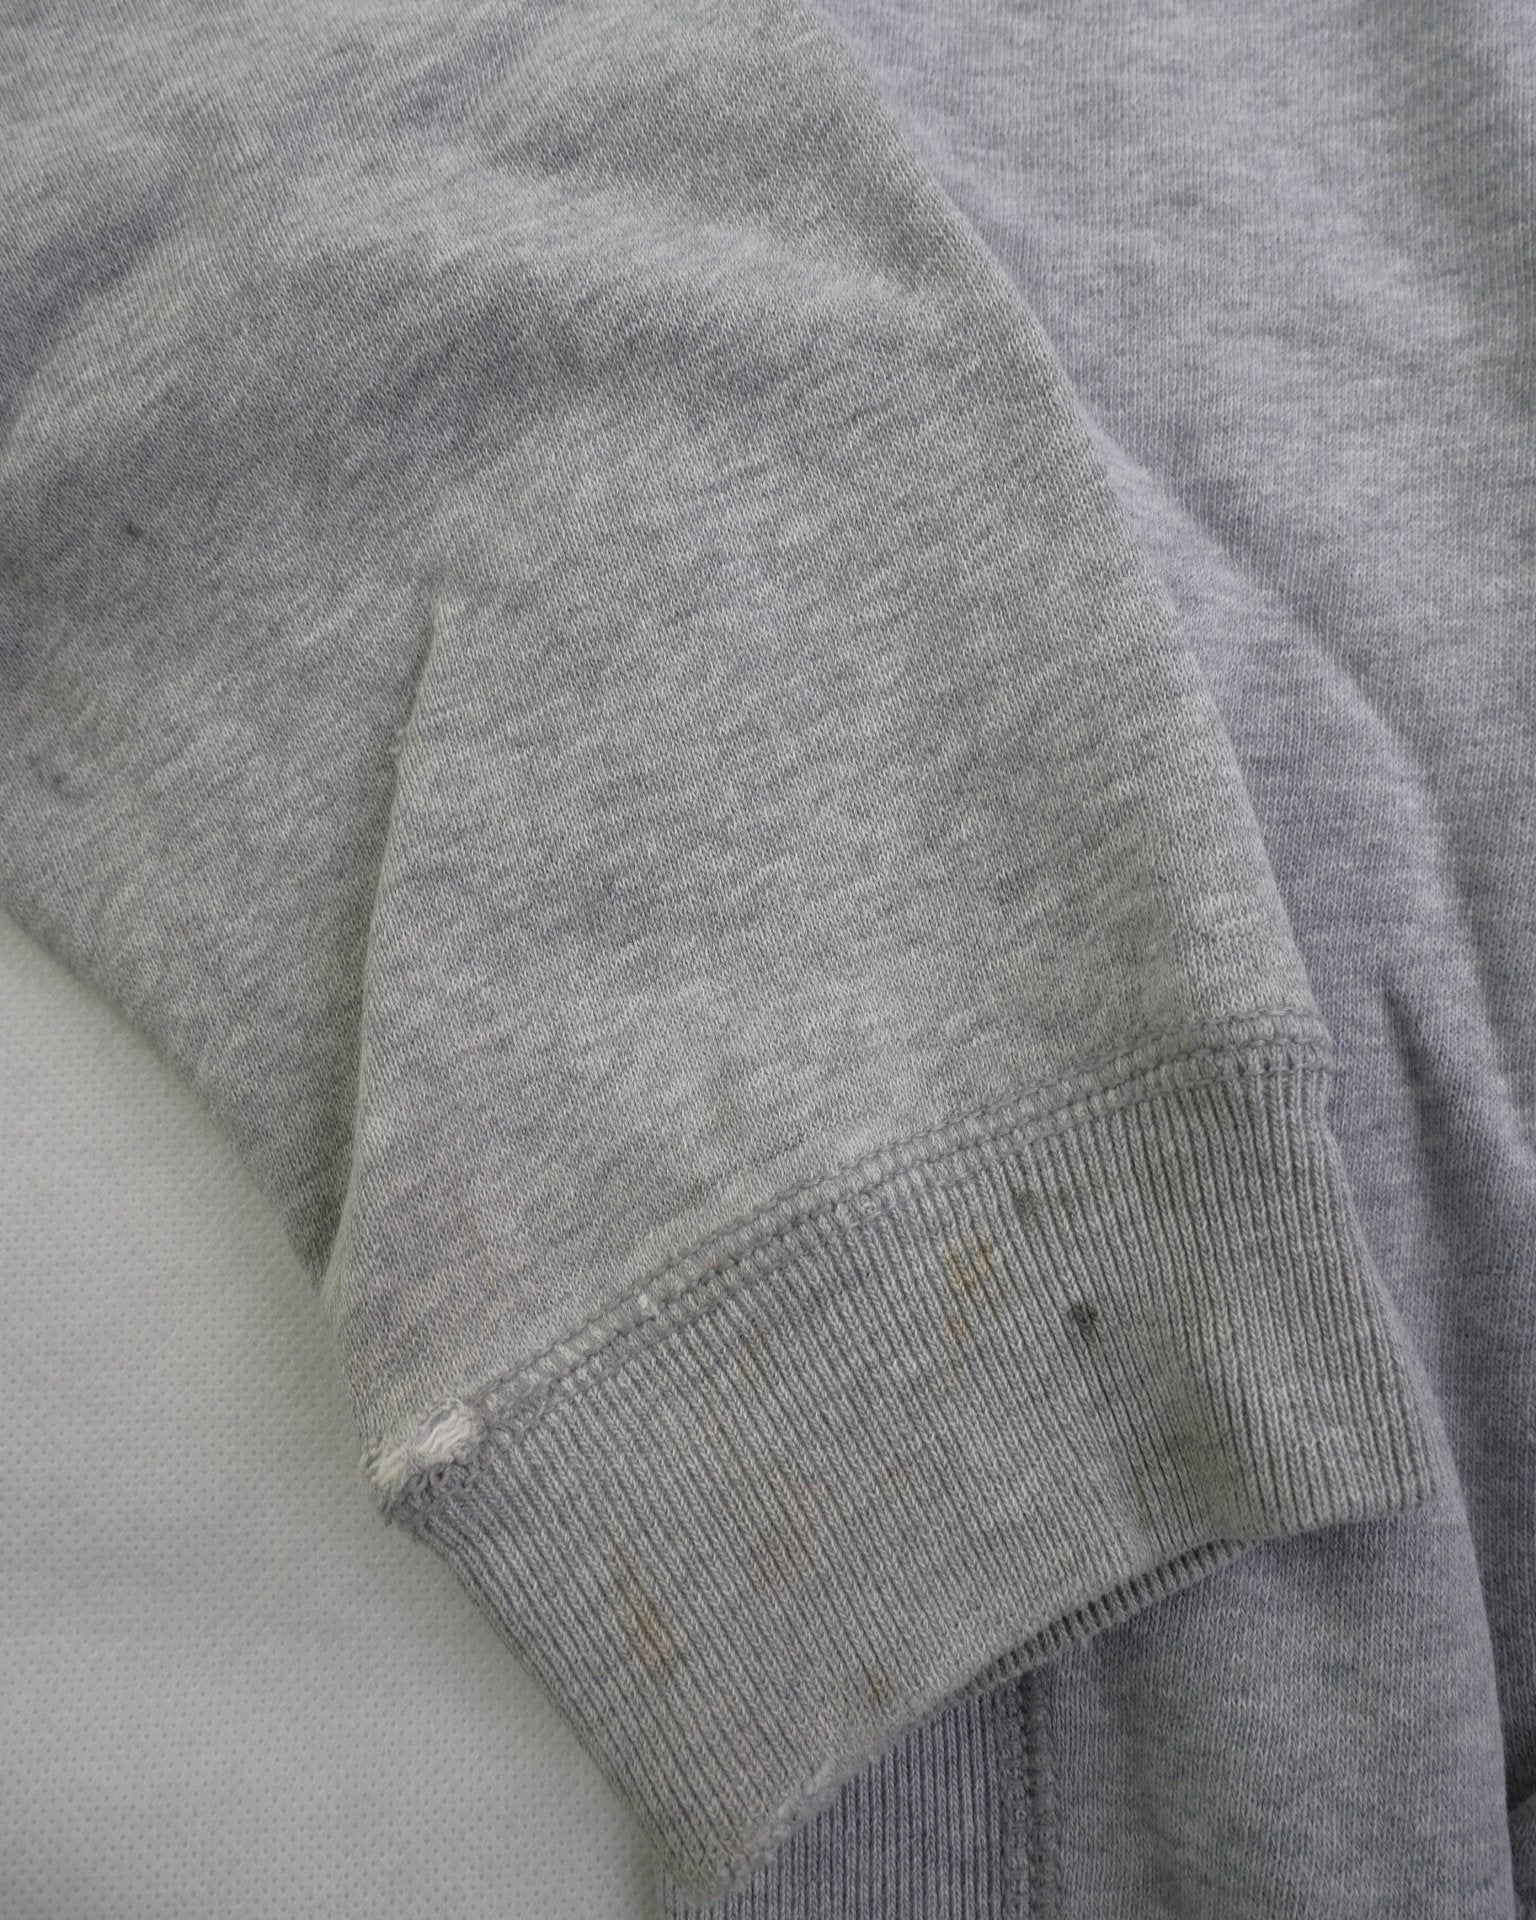 Gap embroidered Spellout Vintage Sweater - Peeces